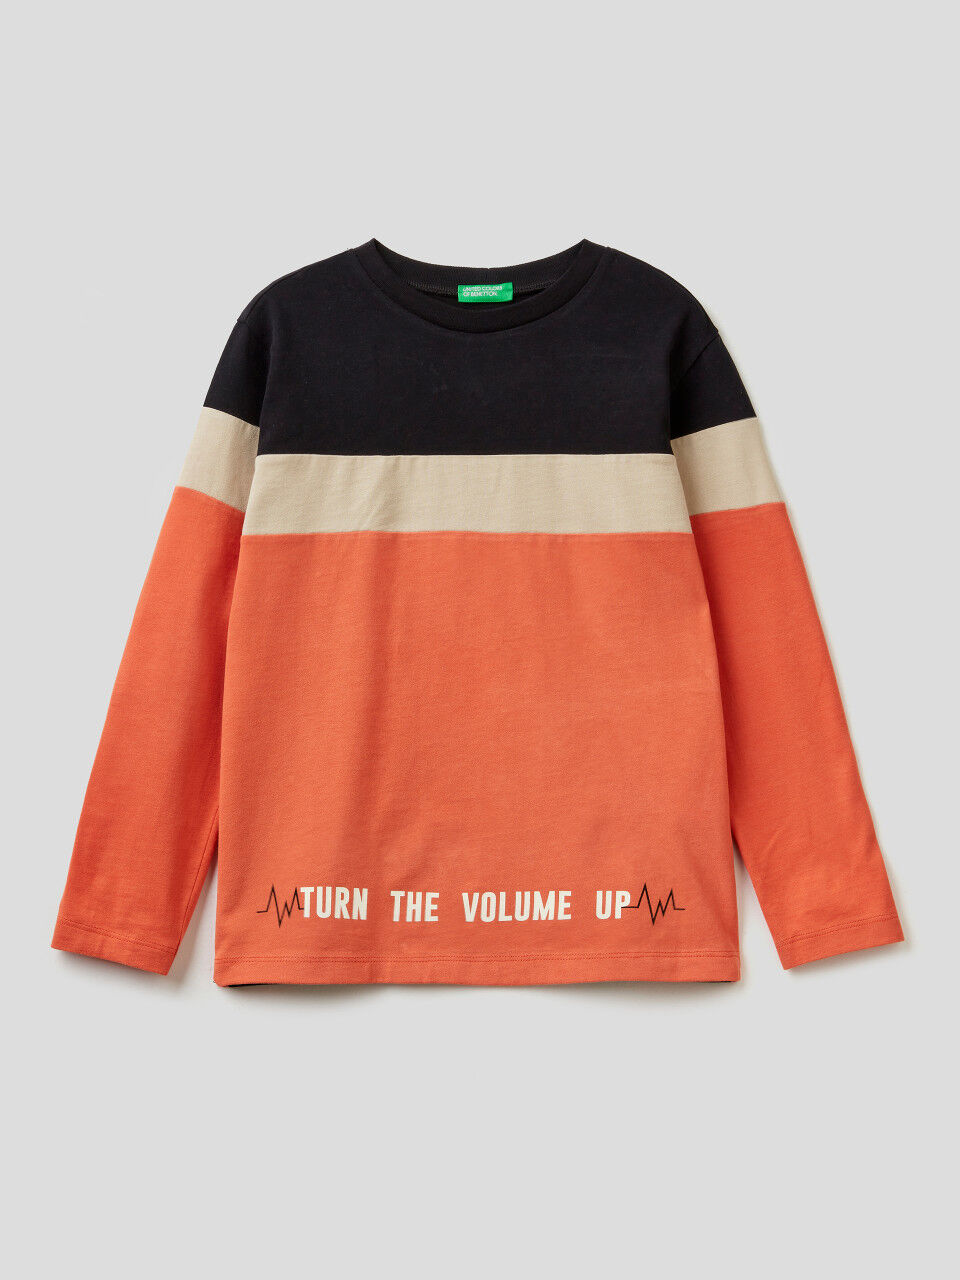 Boys and Girls Turtleneck 100% Cotton in Basic Colors for Kids School Base Layering USA Made 